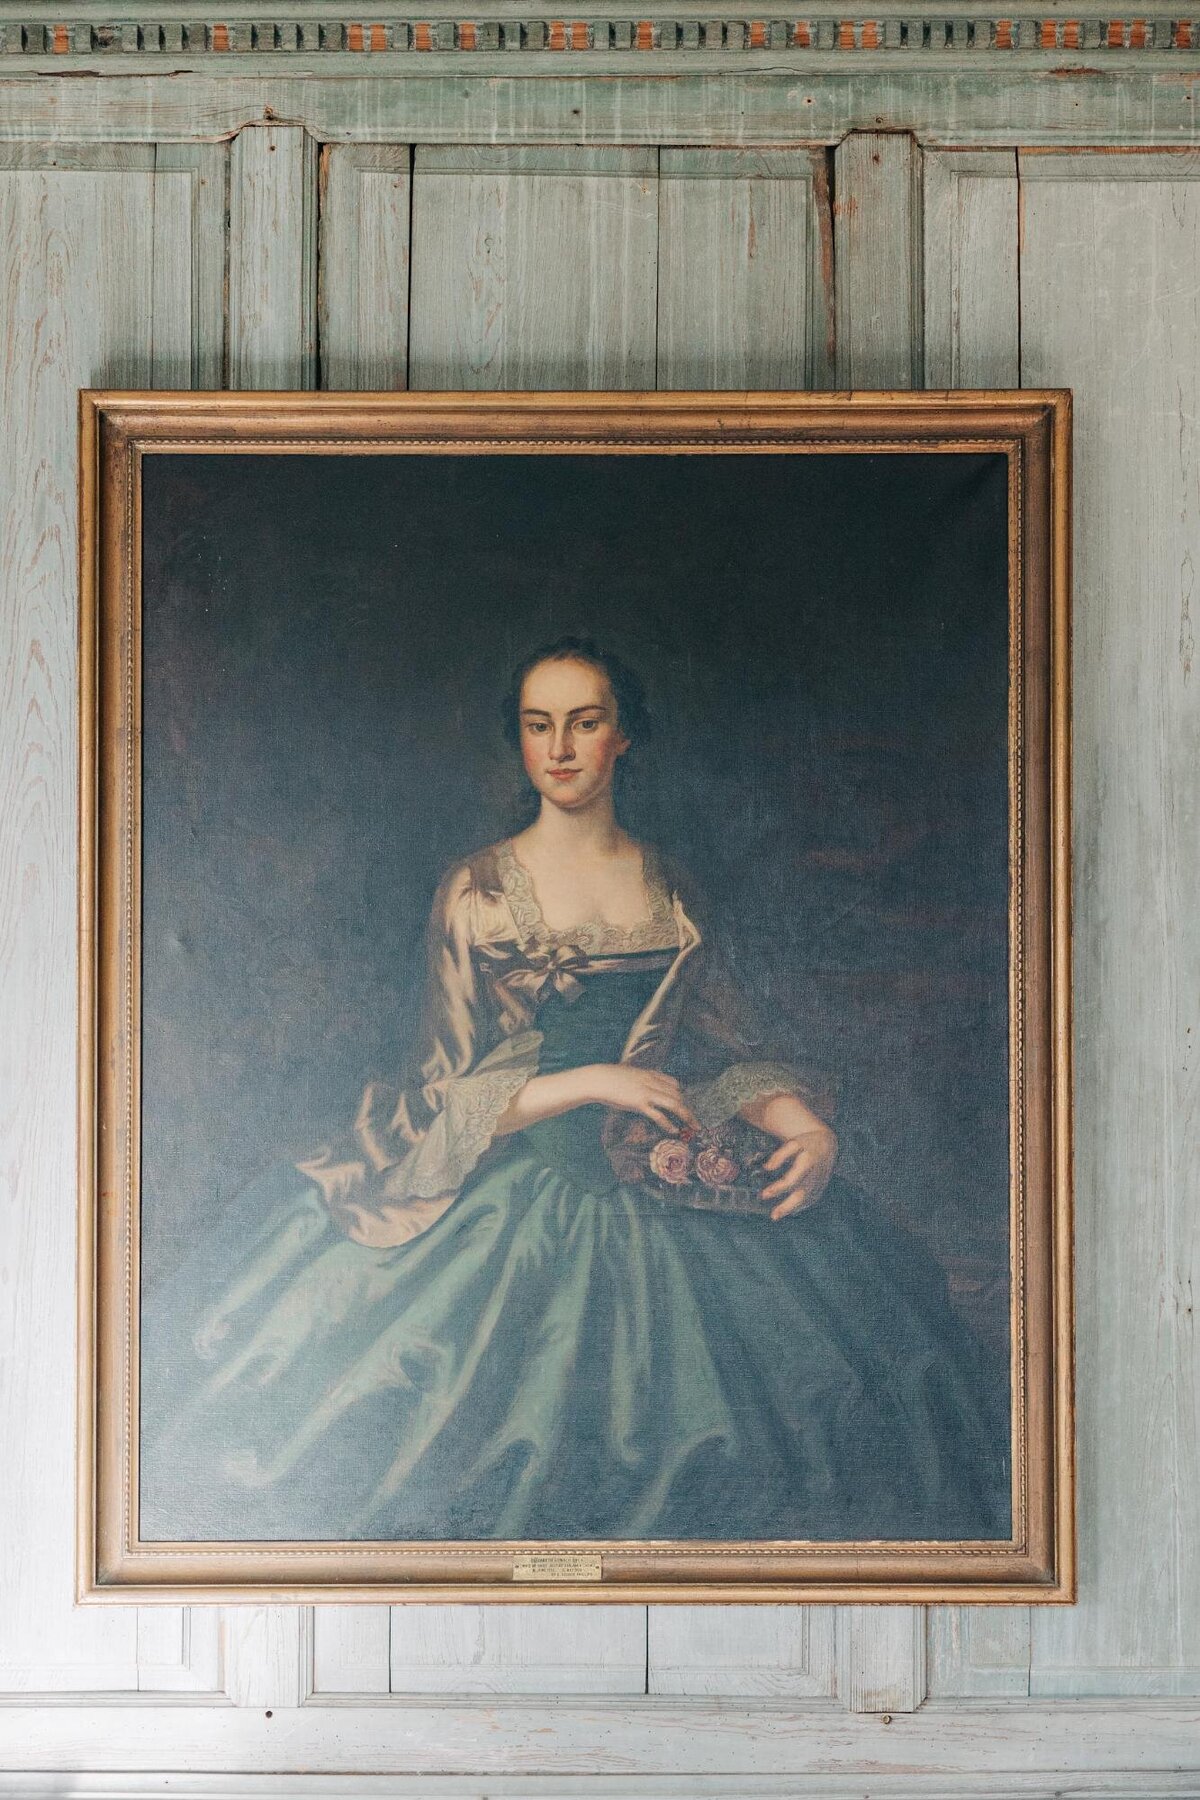 Classic portrait painting of a woman in period dress displayed in a wooden frame.